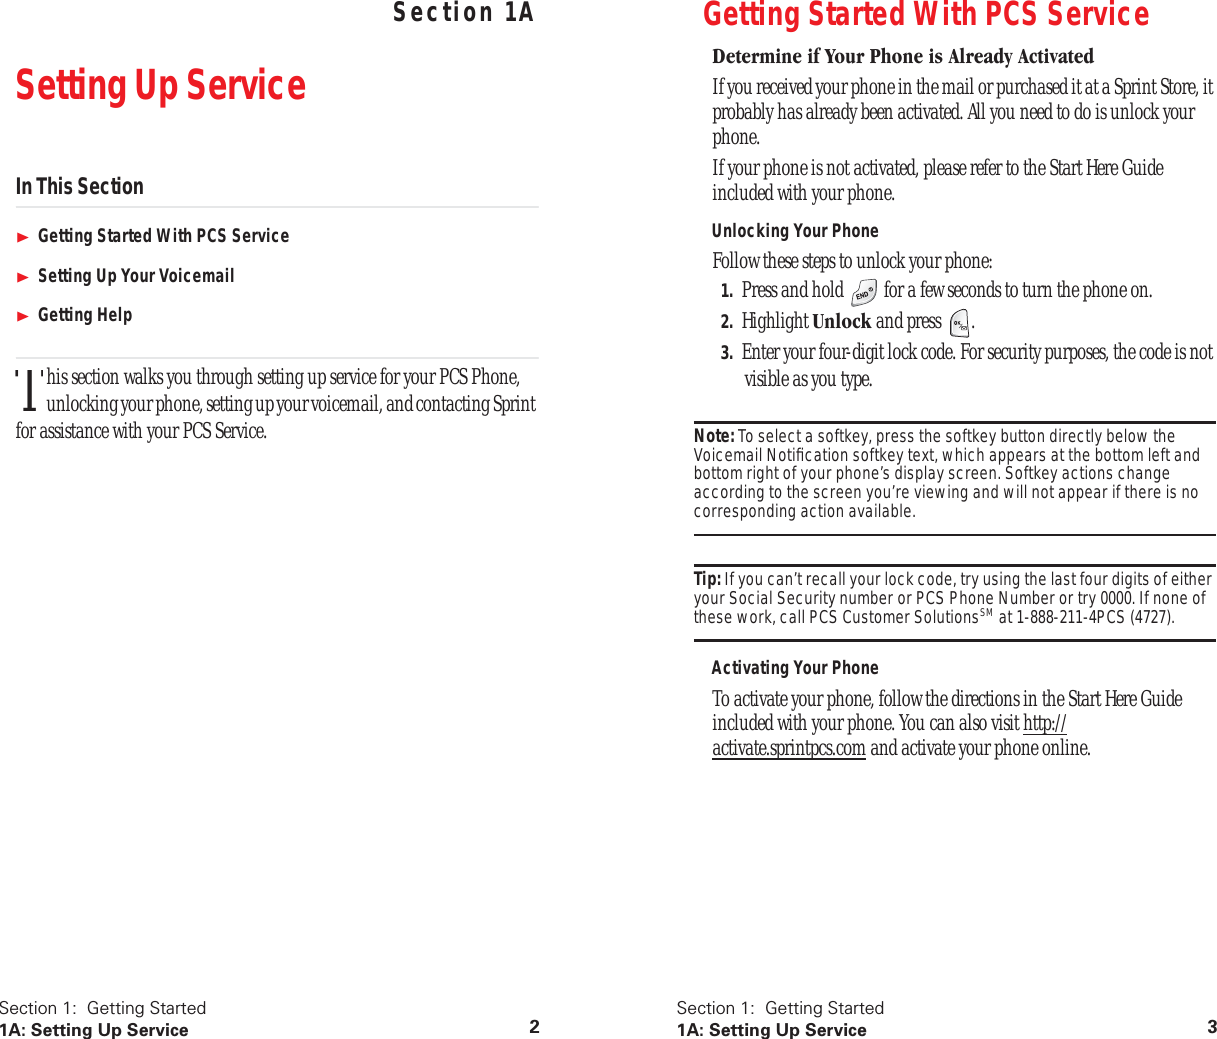  Section 1:  Getting Started 1A: Setting Up Service 2 Section 1A Setting Up Service In This Section Getting Started With PCS Service Setting Up Your Voicemail Getting Help his section walks you through setting up service for your PCS Phone, unlocking your phone, setting up your voicemail, and contacting Sprint for assistance with your PCS Service.T Section 1:  Getting Started 1A: Setting Up Service 3 Getting Started With PCS Service Determine if Your Phone is Already Activated If you received your phone in the mail or purchased it at a Sprint Store, it probably has already been activated. All you need to do is unlock your phone.If your phone is not activated, please refer to the Start Here Guide included with your phone.  Unlocking Your Phone Follow these steps to unlock your phone: 1. Press and hold   for a few seconds to turn the phone on. 2. Highlight  Unlock  and press  . 3. Enter your four-digit lock code. For security purposes, the code is not visible as you type. Note:  To select a softkey, press the softkey button directly below the Voicemail Notiﬁcation softkey text, which appears at the bottom left and bottom right of your phone’s display screen. Softkey actions change according to the screen you’re viewing and will not appear if there is no  corresponding action available. Tip:  If you can’t recall your lock code, try using the last four digits of either your Social Security number or PCS Phone Number or try 0000. If none of  these work, call PCS Customer Solutions SM  at 1-888-211-4PCS (4727). Activating Your Phone To activate your phone, follow the directions in the Start Here Guide included with your phone. You can also visit http://activate.sprintpcs.com and activate your phone online.